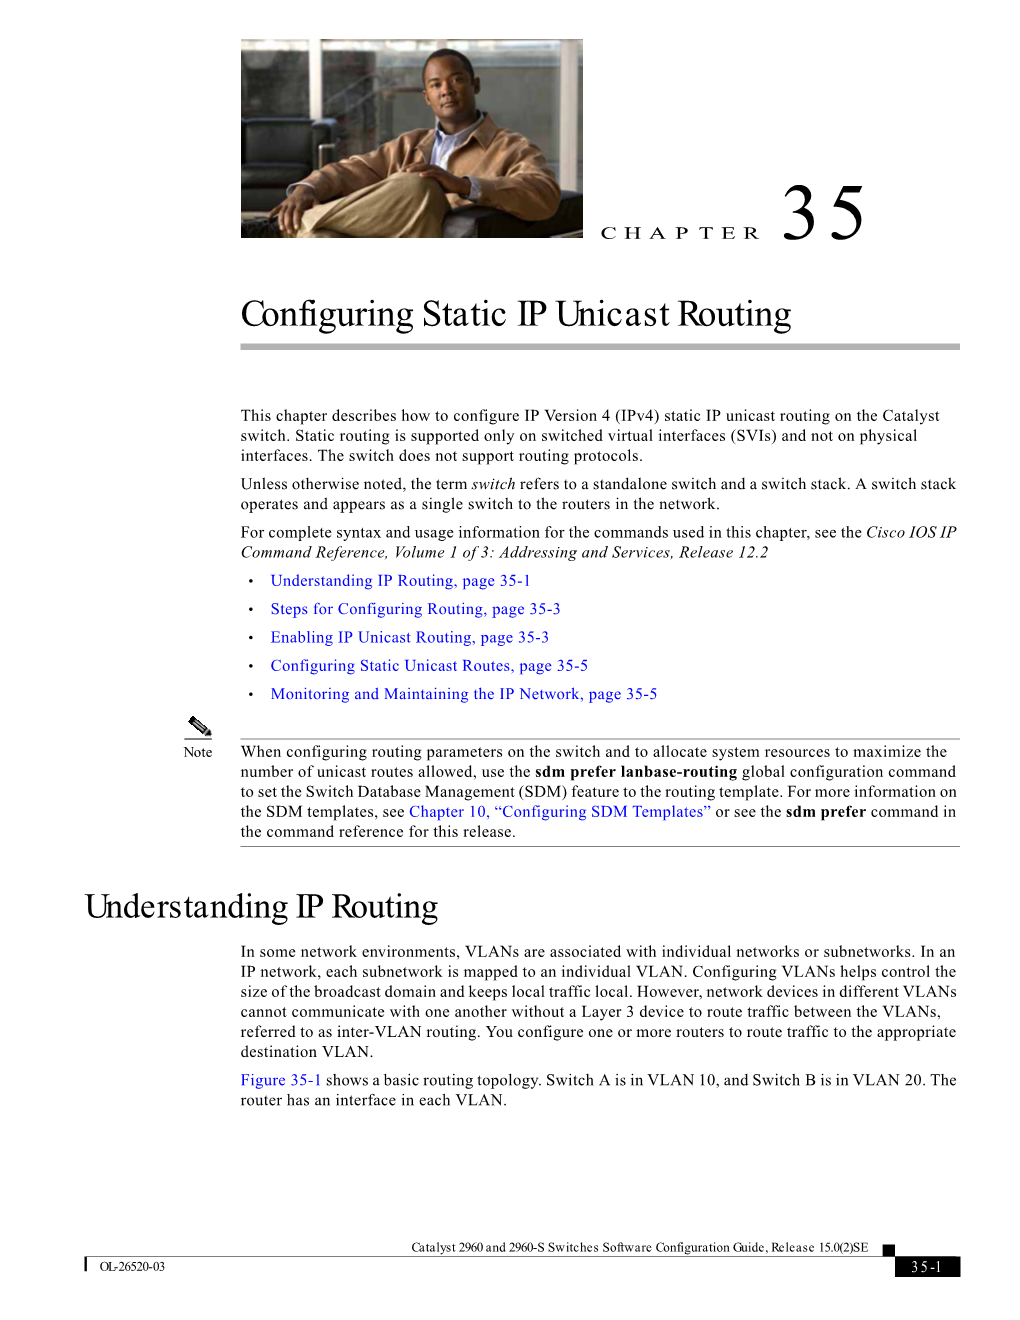 Configuring Static IP Unicast Routing